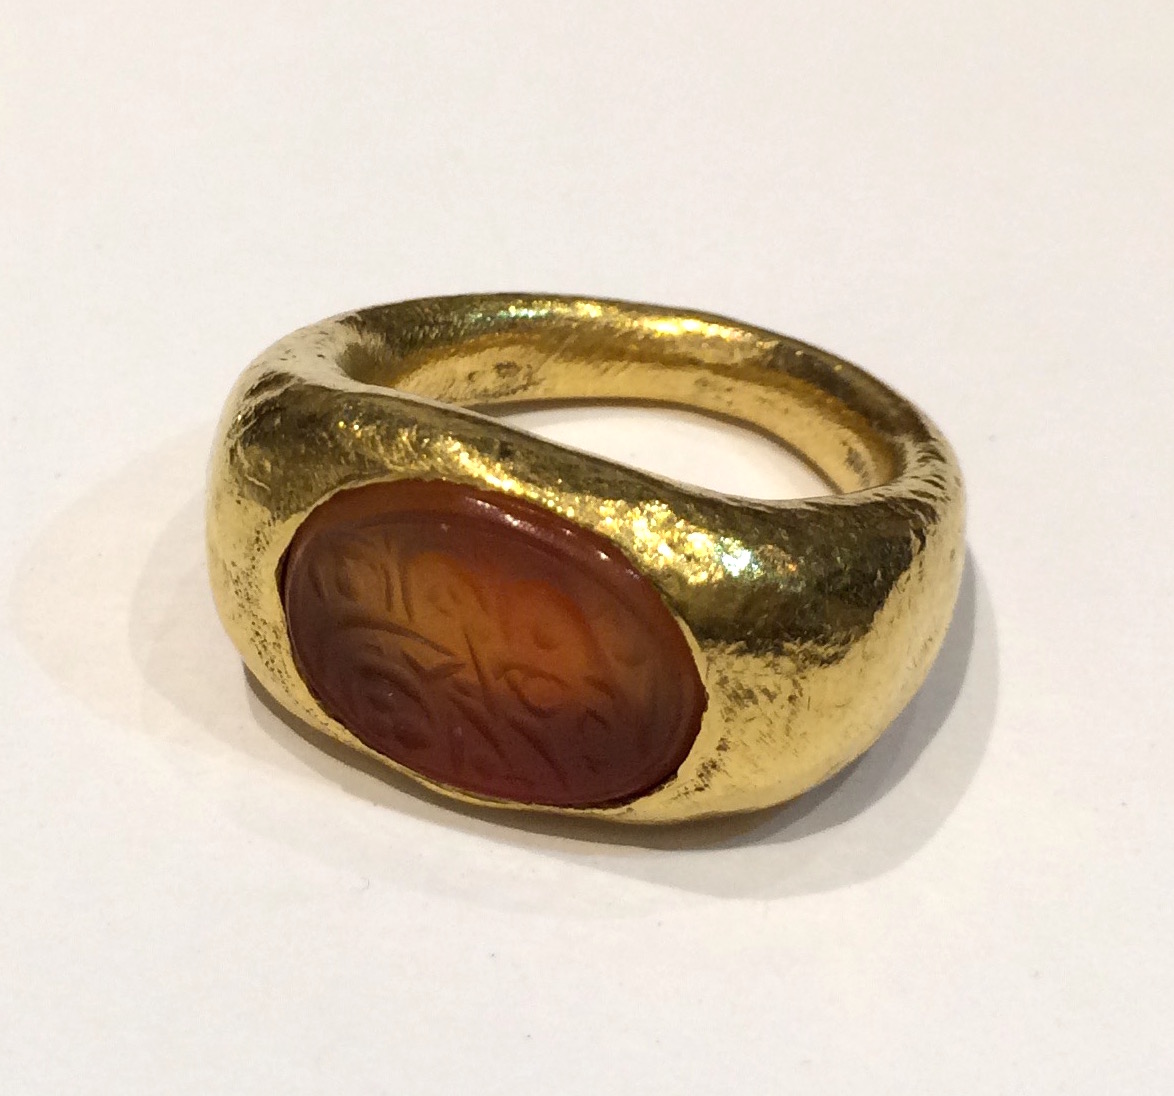 Ancient ring in 22K gold set with an oval carnelian intaglio with an inscription, “In the name of God the most gracious and merciful.”, c. 200 A. D.